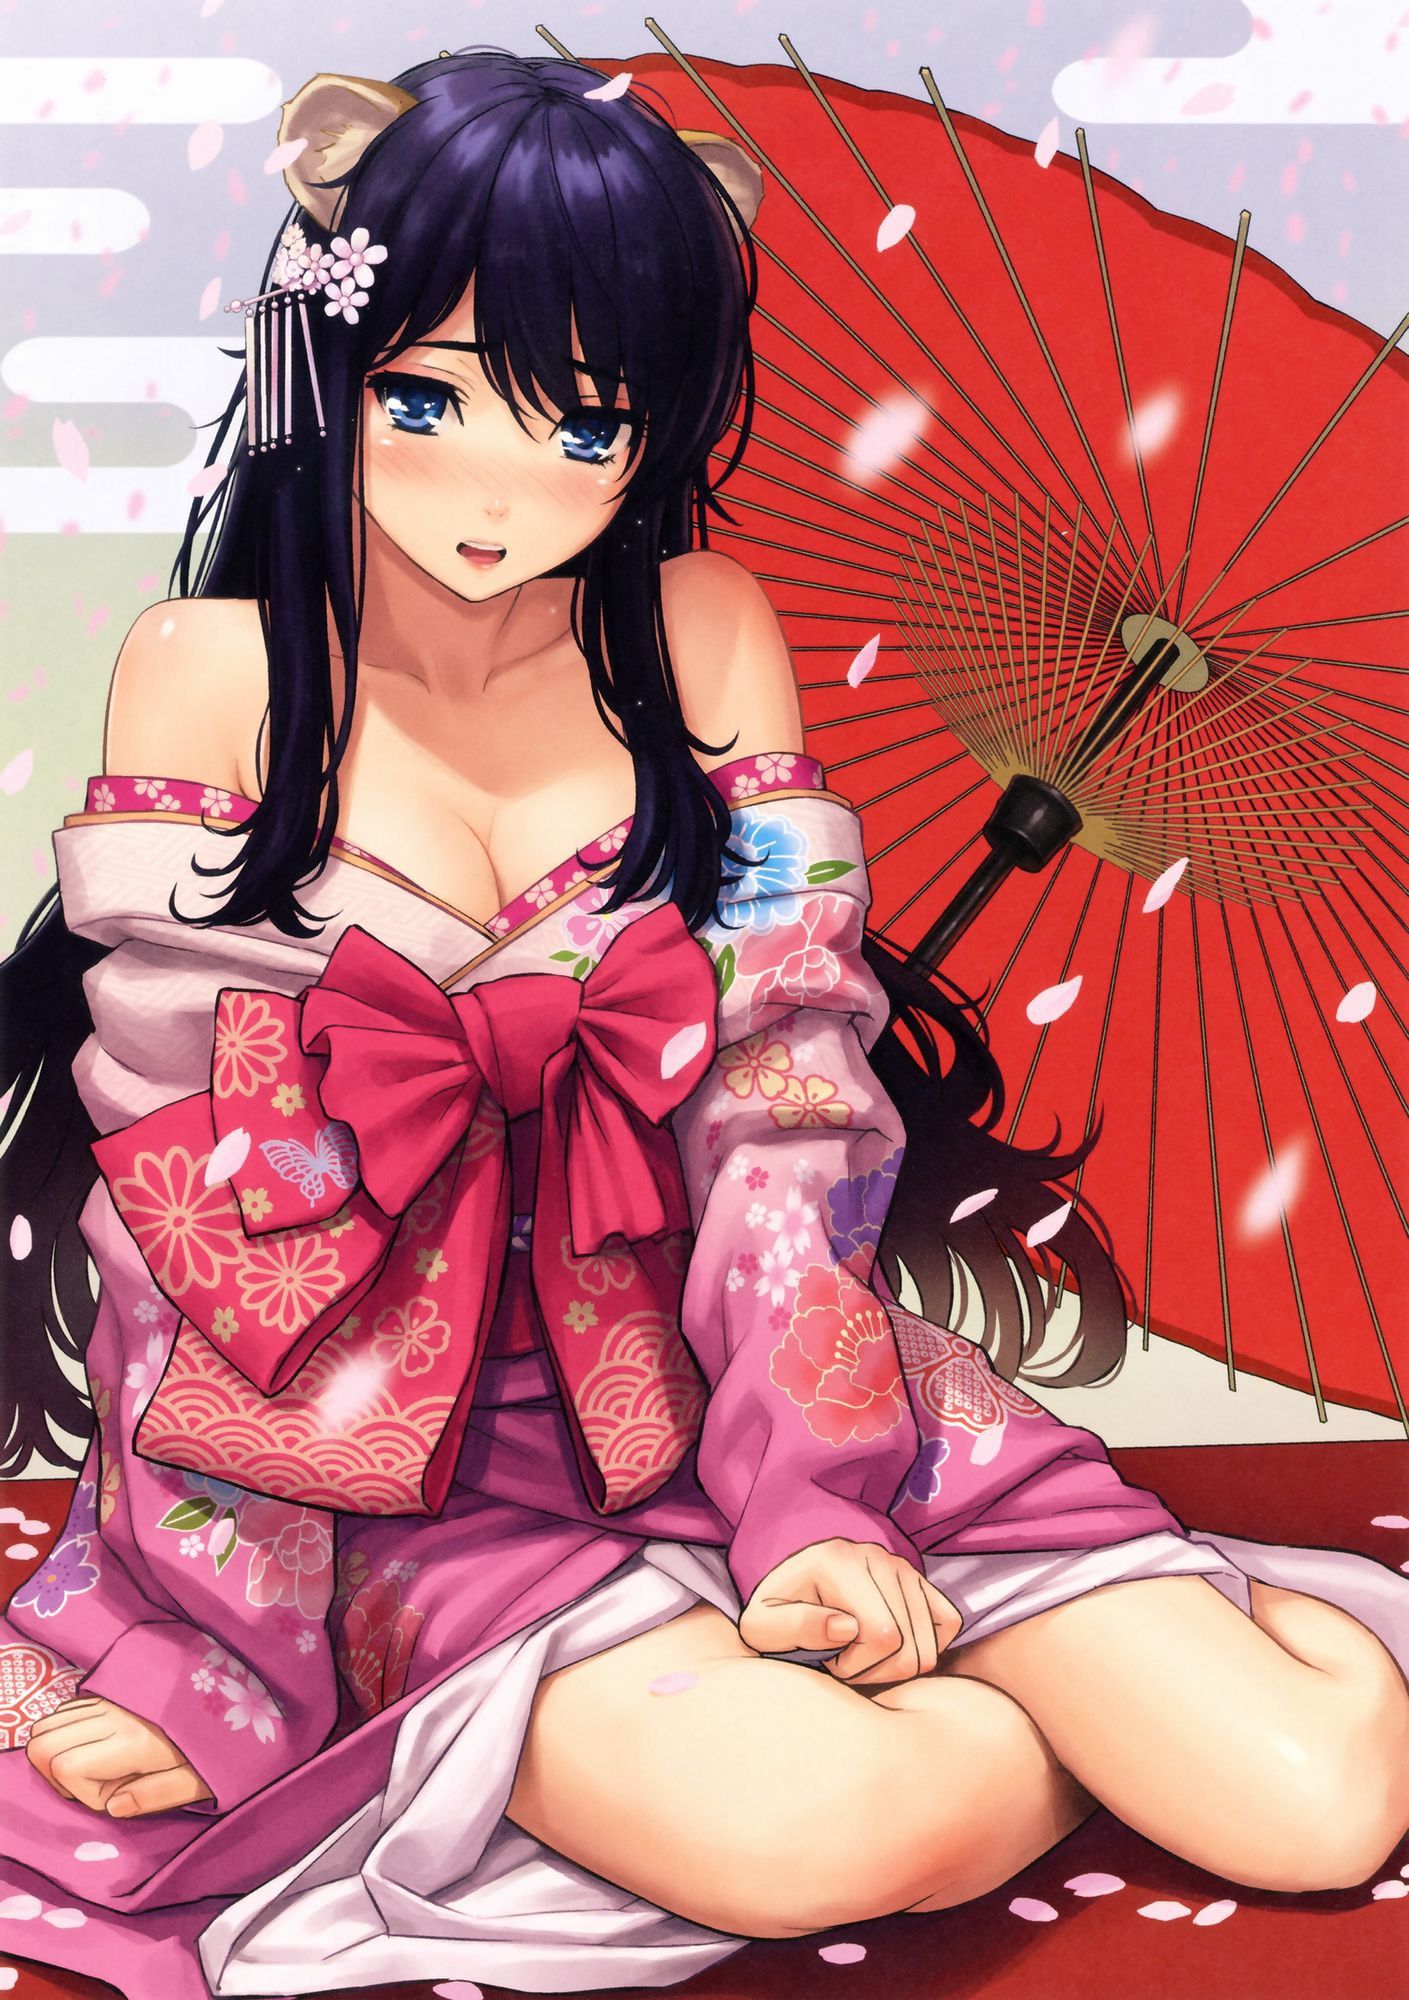 Erotic images that will make you love shrine maidens, yukatas, and japanese-style girls irresistibly 8